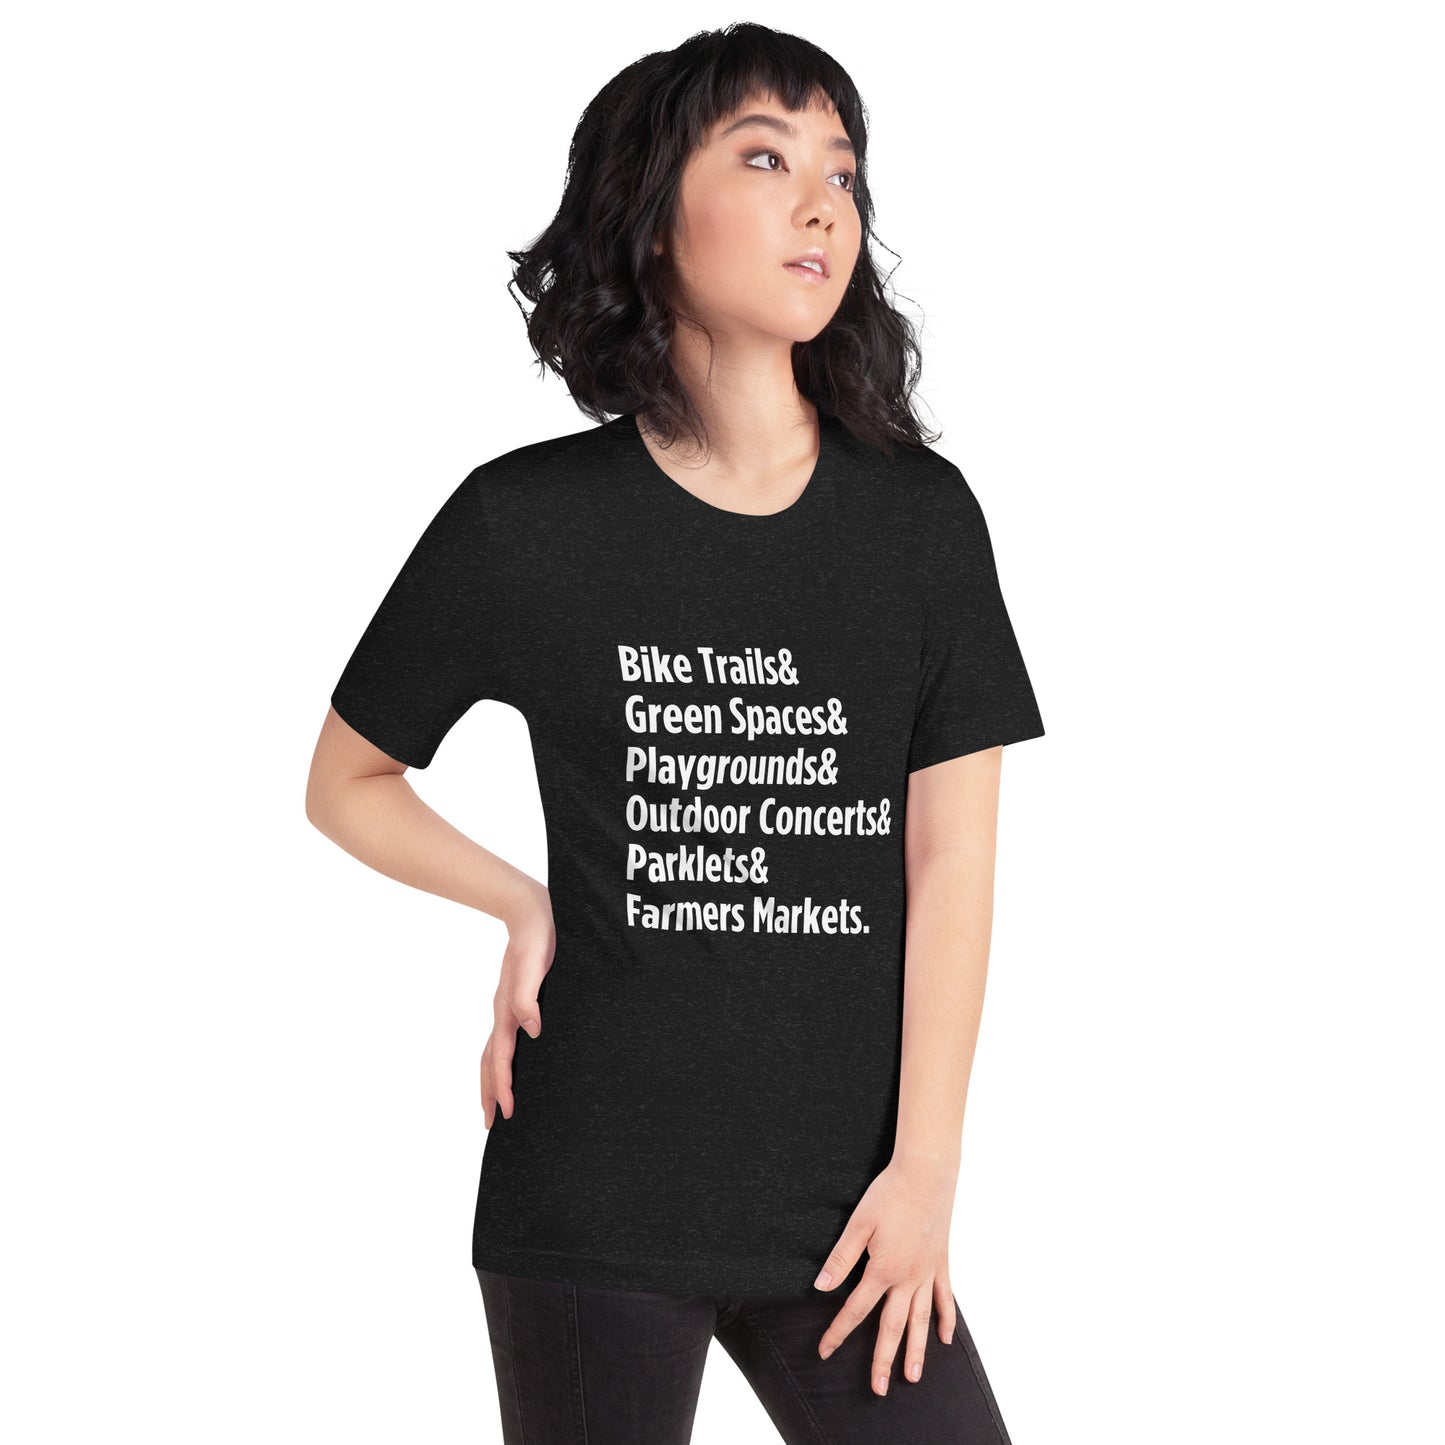 Customizable "Only on Main Streets" (Greenspaces) Unisex T-shirt